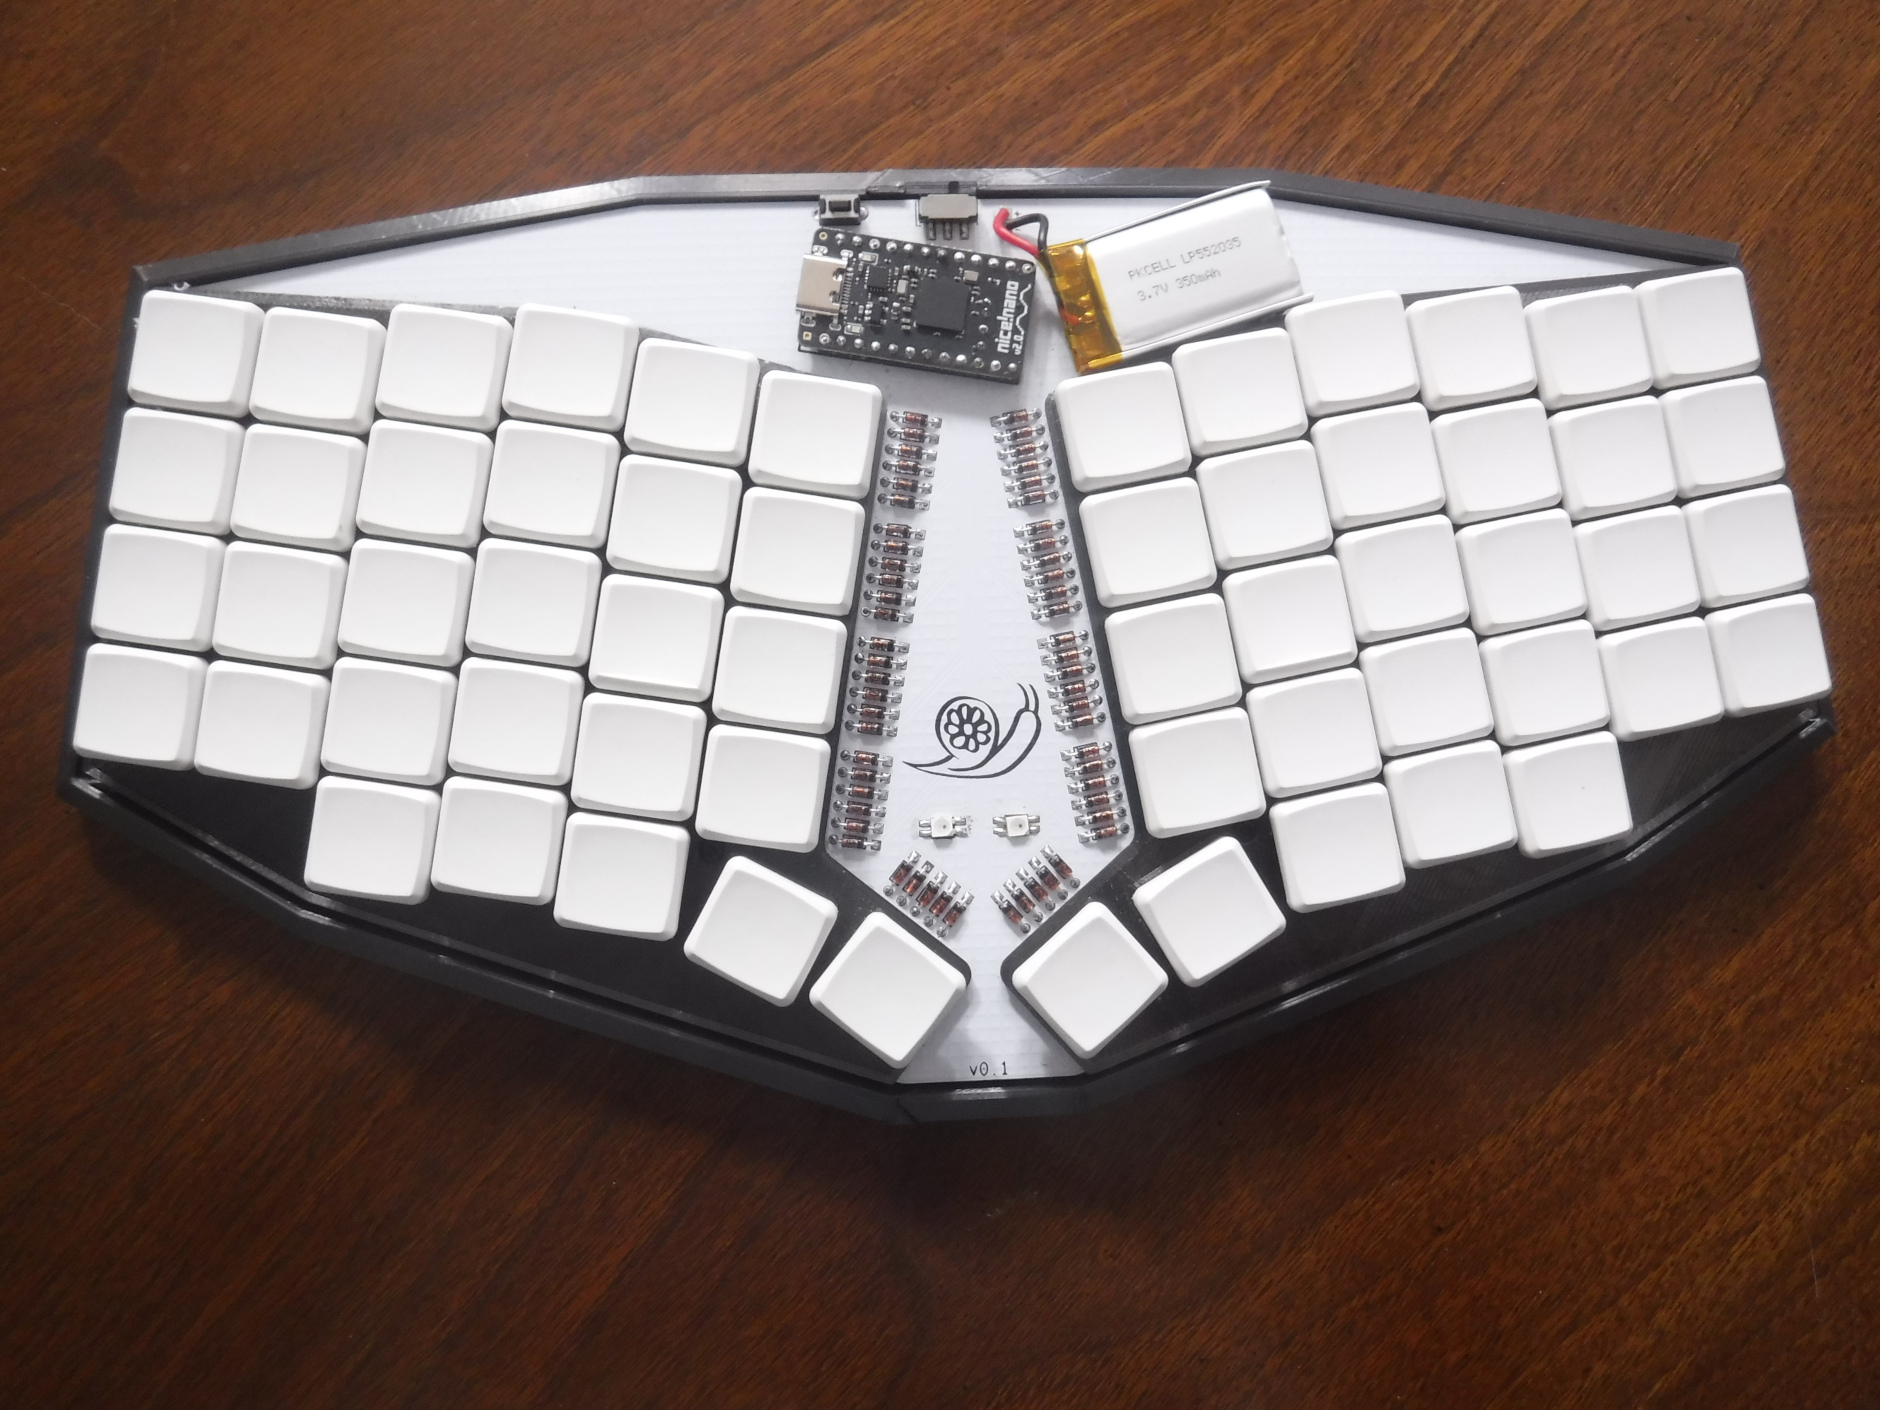 Image of the completed keyboard